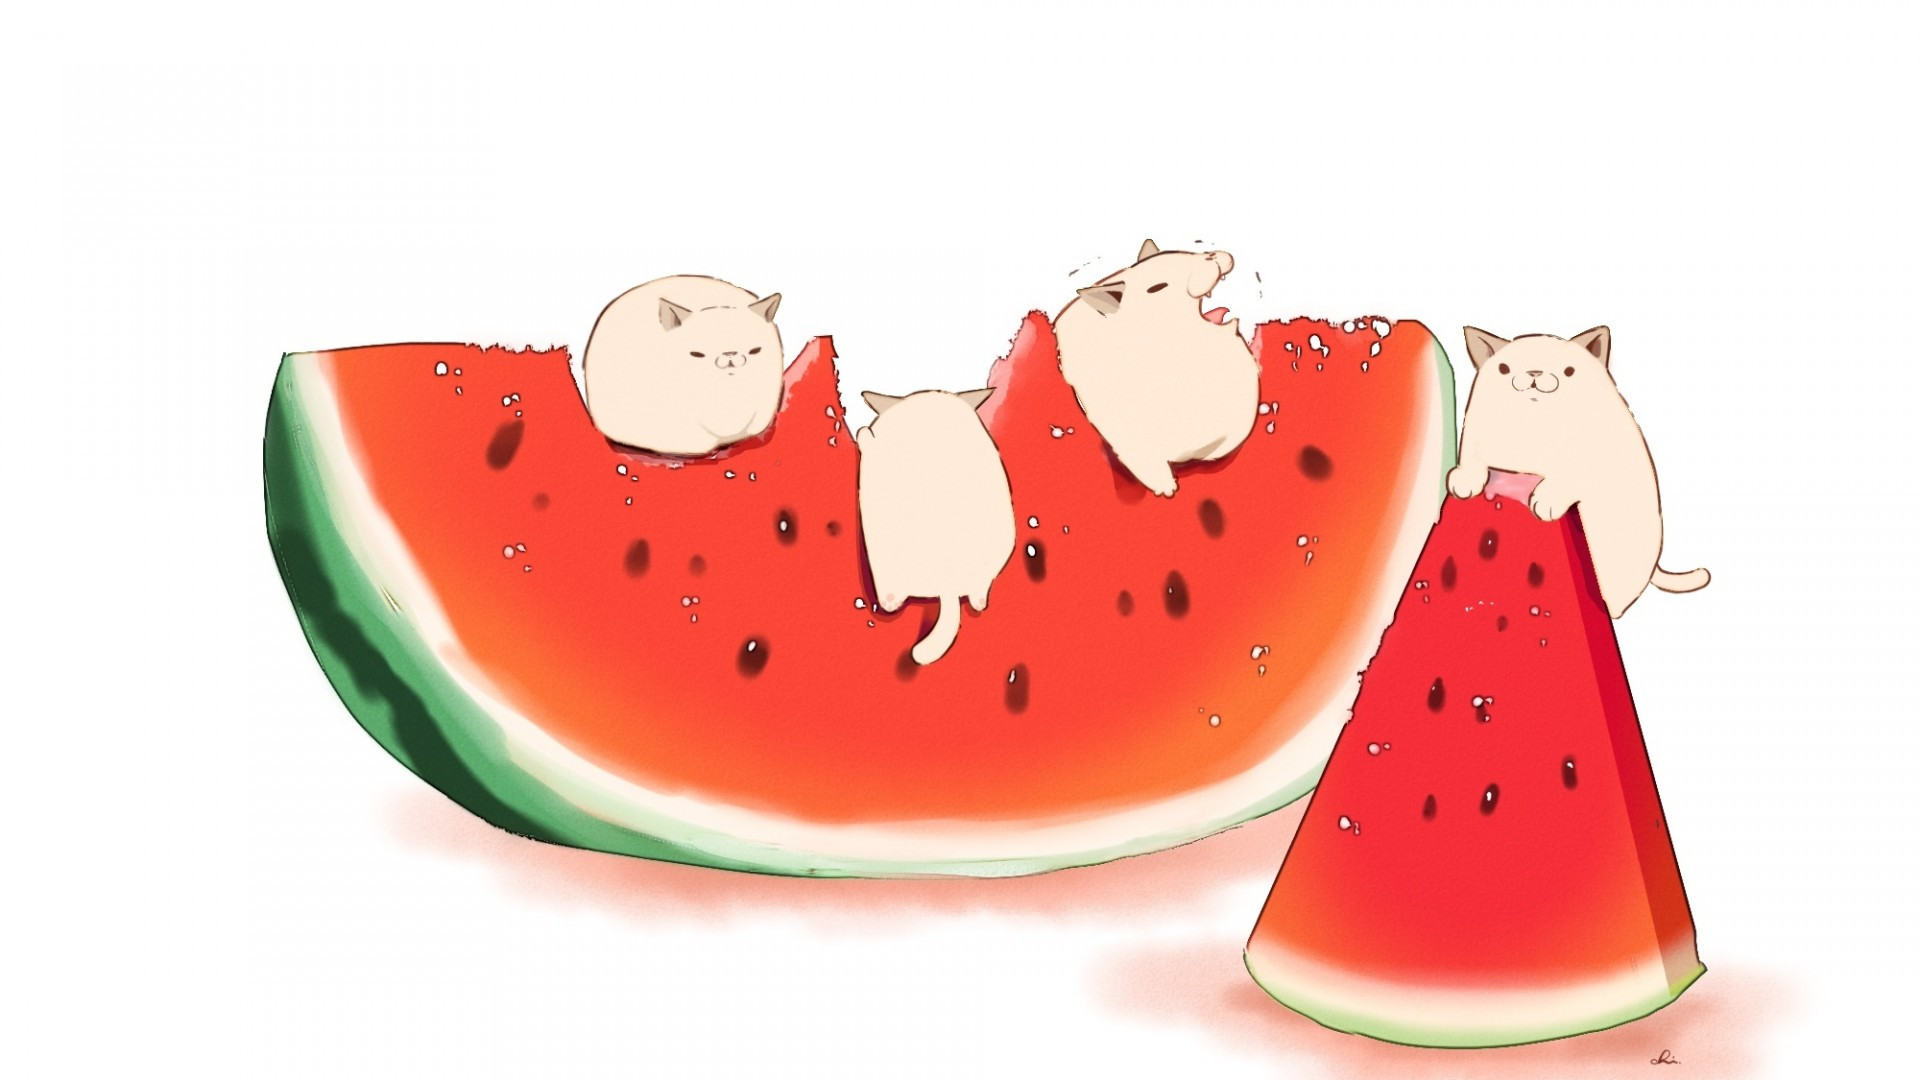 Download 1920x1080 Anime Fruits, Watermelon, Cute Creatures, Piece Wallpaper for Widescreen